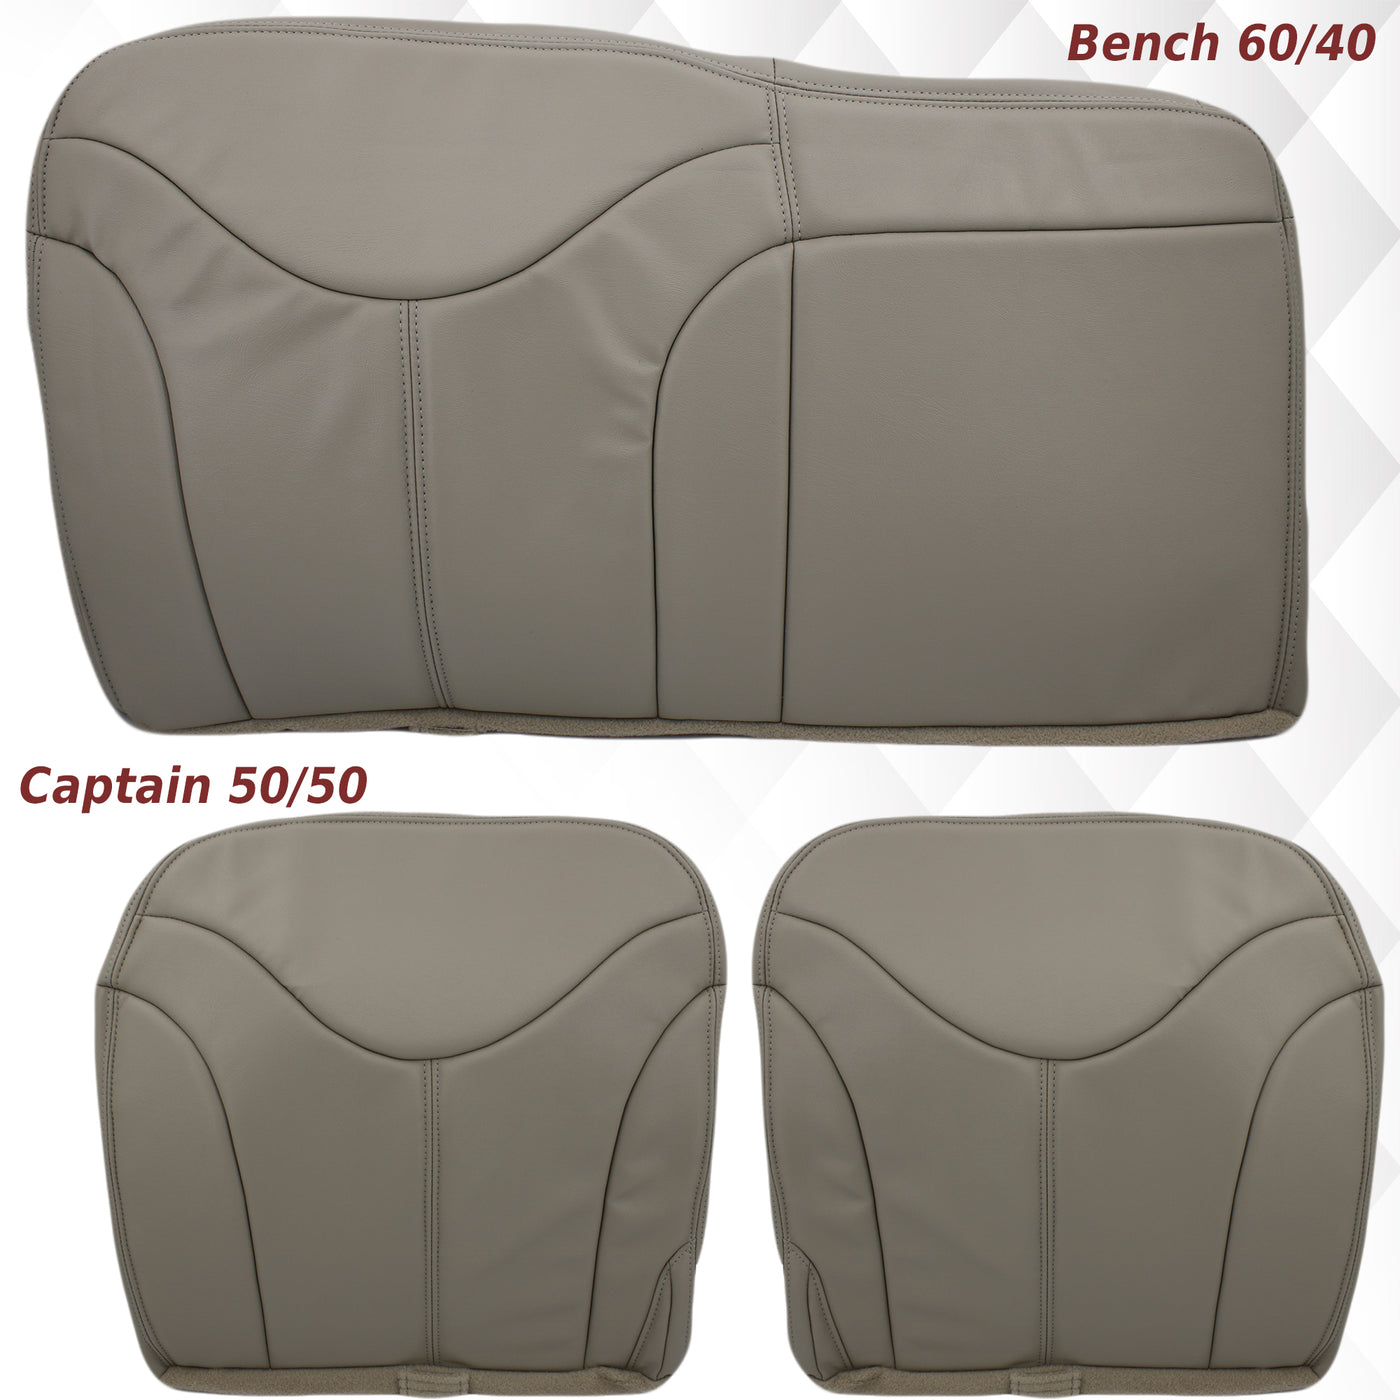  The Seat Shop Full Front Row Factory Match Leather Kit - Shale  Tan with Medium Dark Pewter Gray Trim (Compatible with 2000-2002 Chevrolet  Tahoe and Suburban SUV's) : Automotive